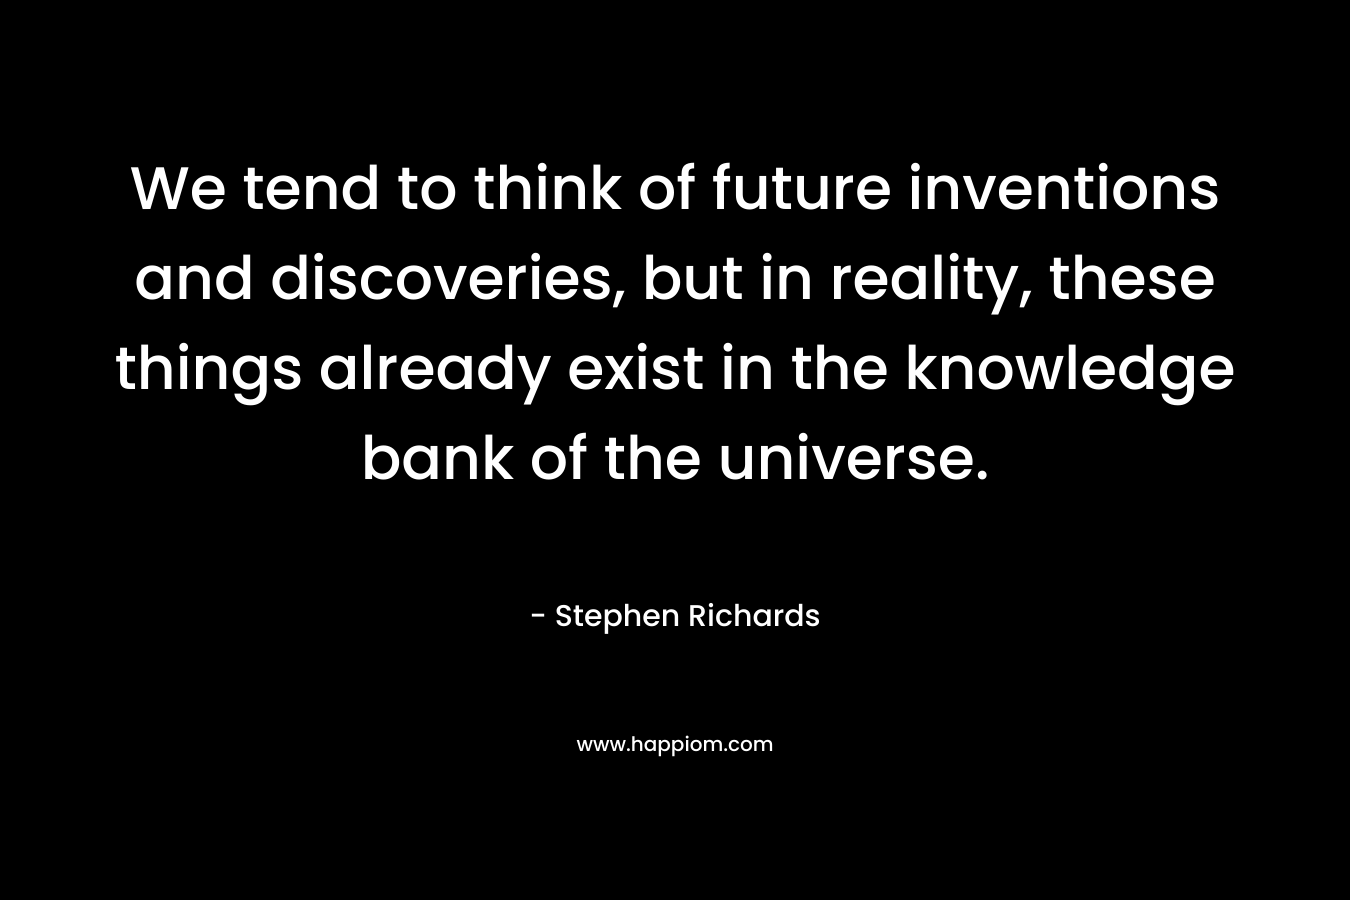 We tend to think of future inventions and discoveries, but in reality, these things already exist in the knowledge bank of the universe. – Stephen Richards